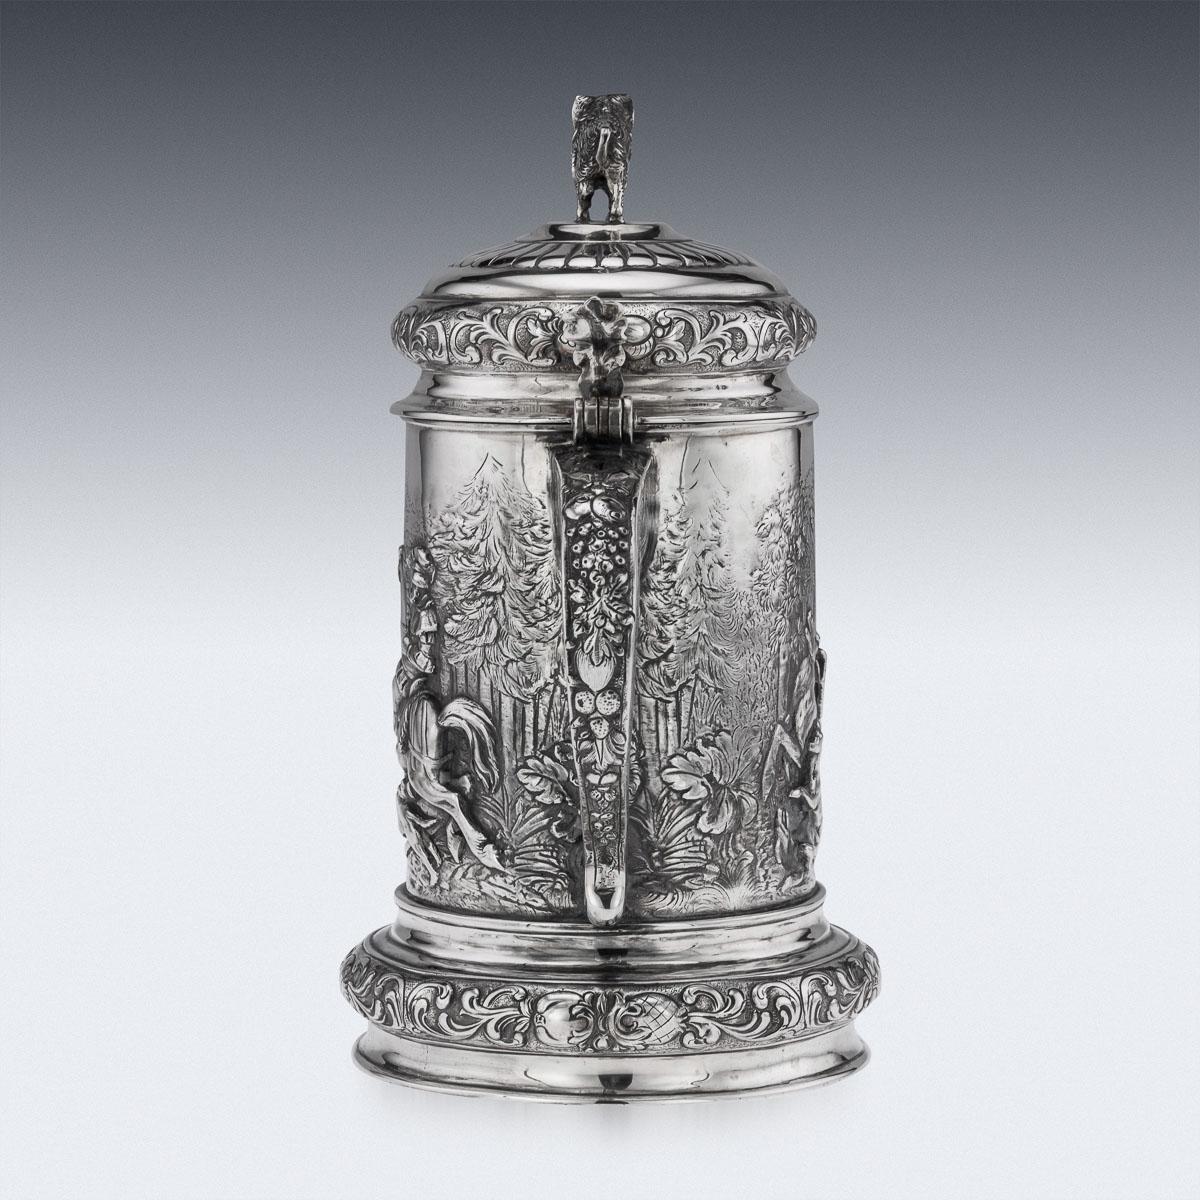 19th Century German (Hanau) silver large lidded tankard, in the style of the early 16th century example, beautifully chased and embossed with a very detailed and crowded hunting scenes.
Hallmarked with German marks 800 (800+ standard), Hanau,